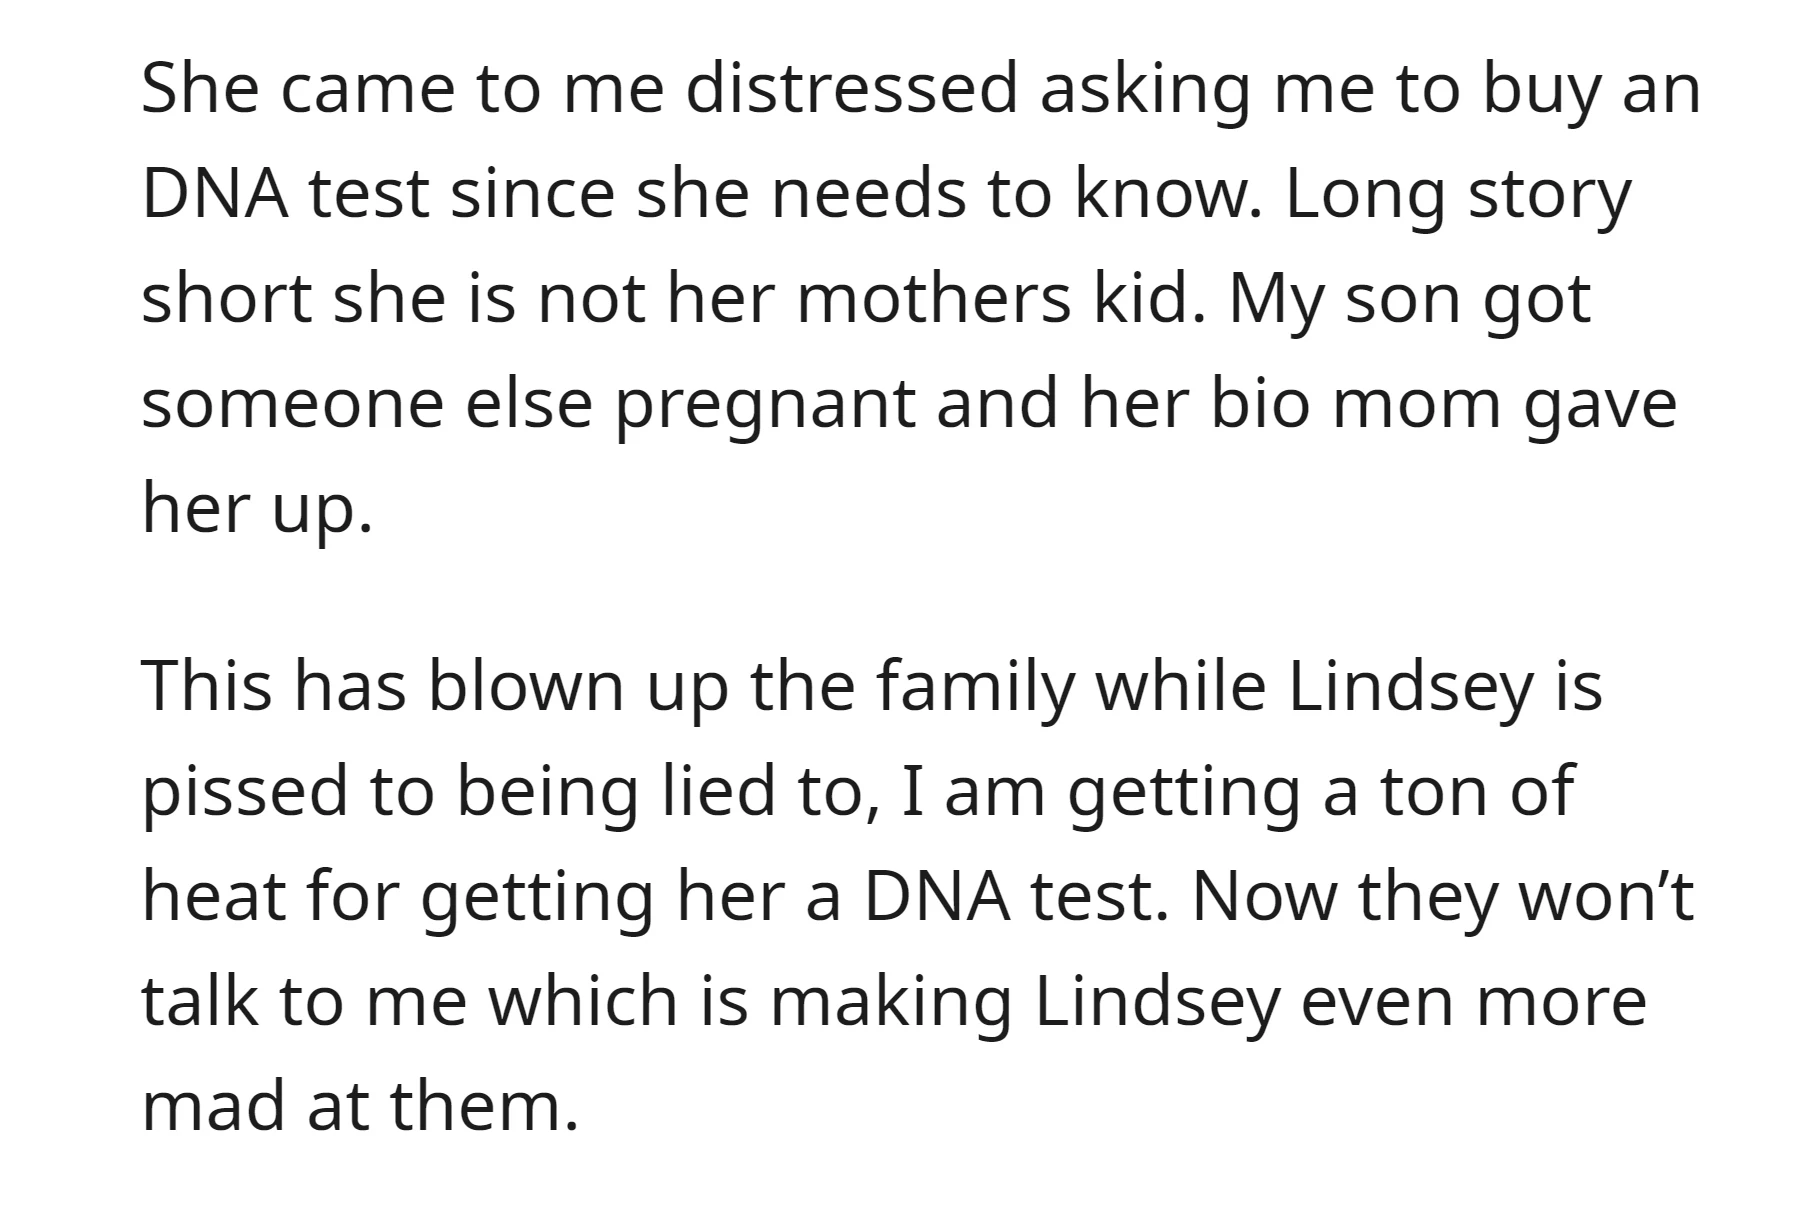 Through a DNA test, Lindsey found that she is not her mother's biological child